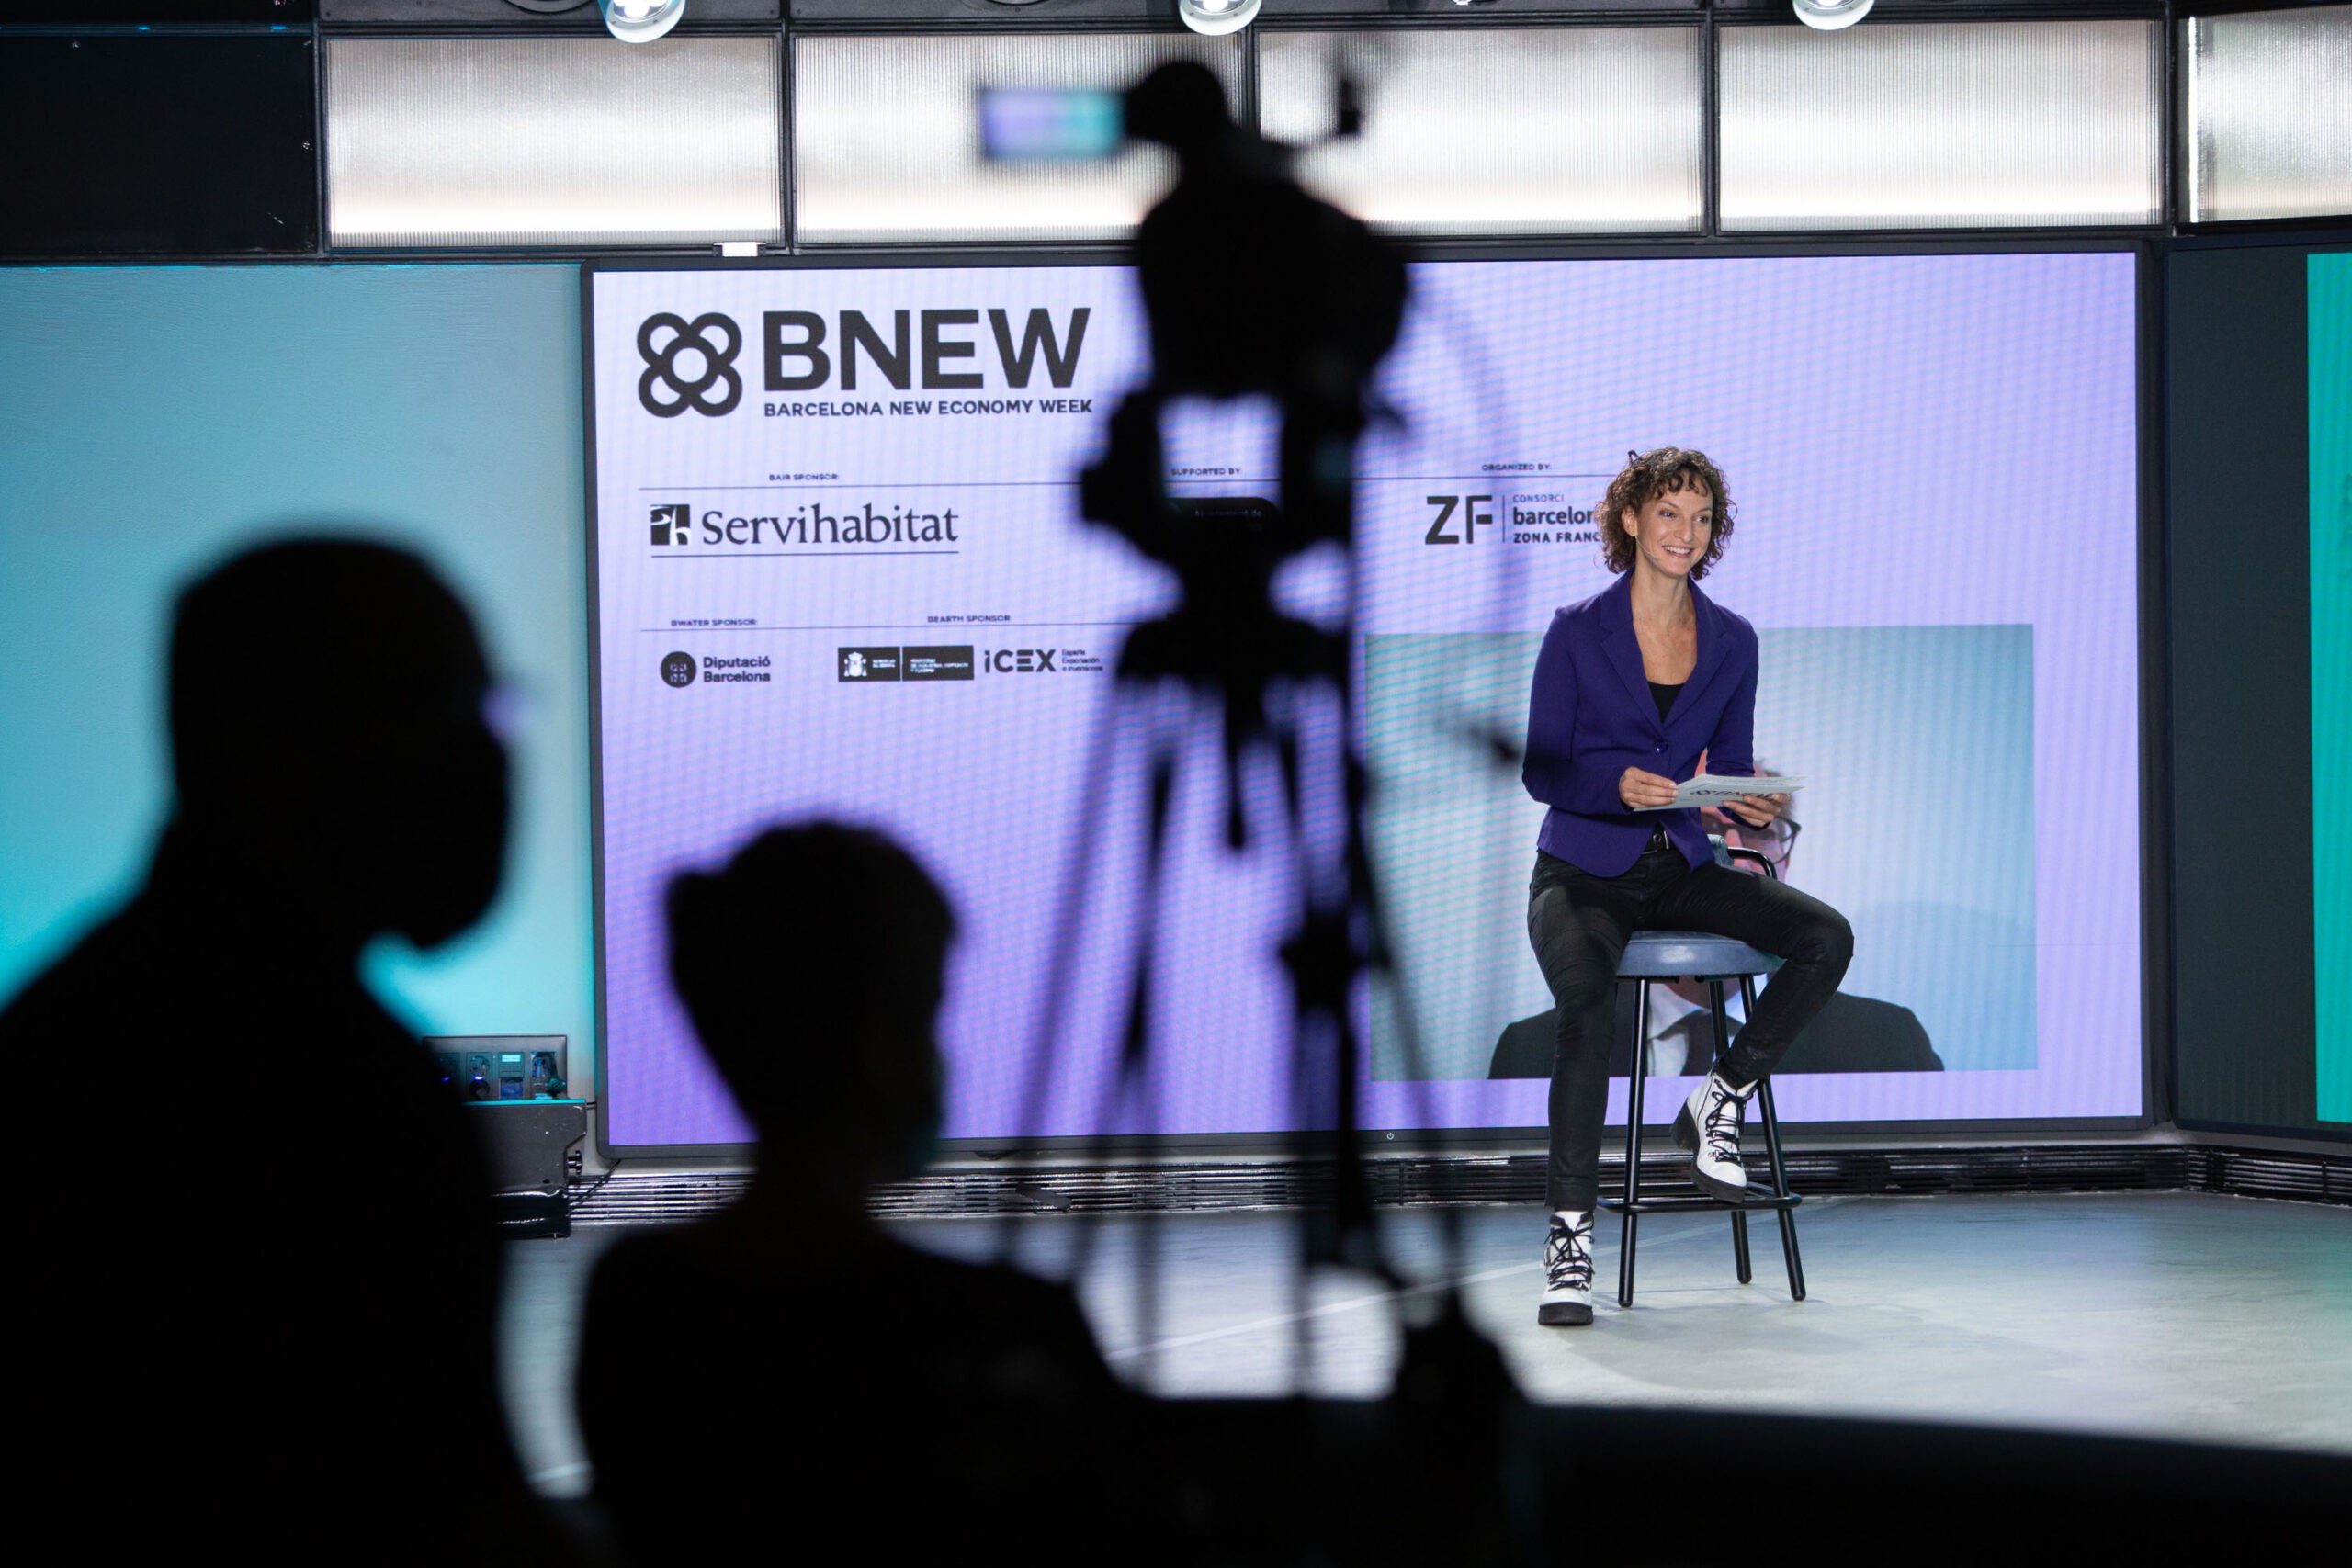 One year on: Reviewing BNEW 2020, the networking event of the new decade